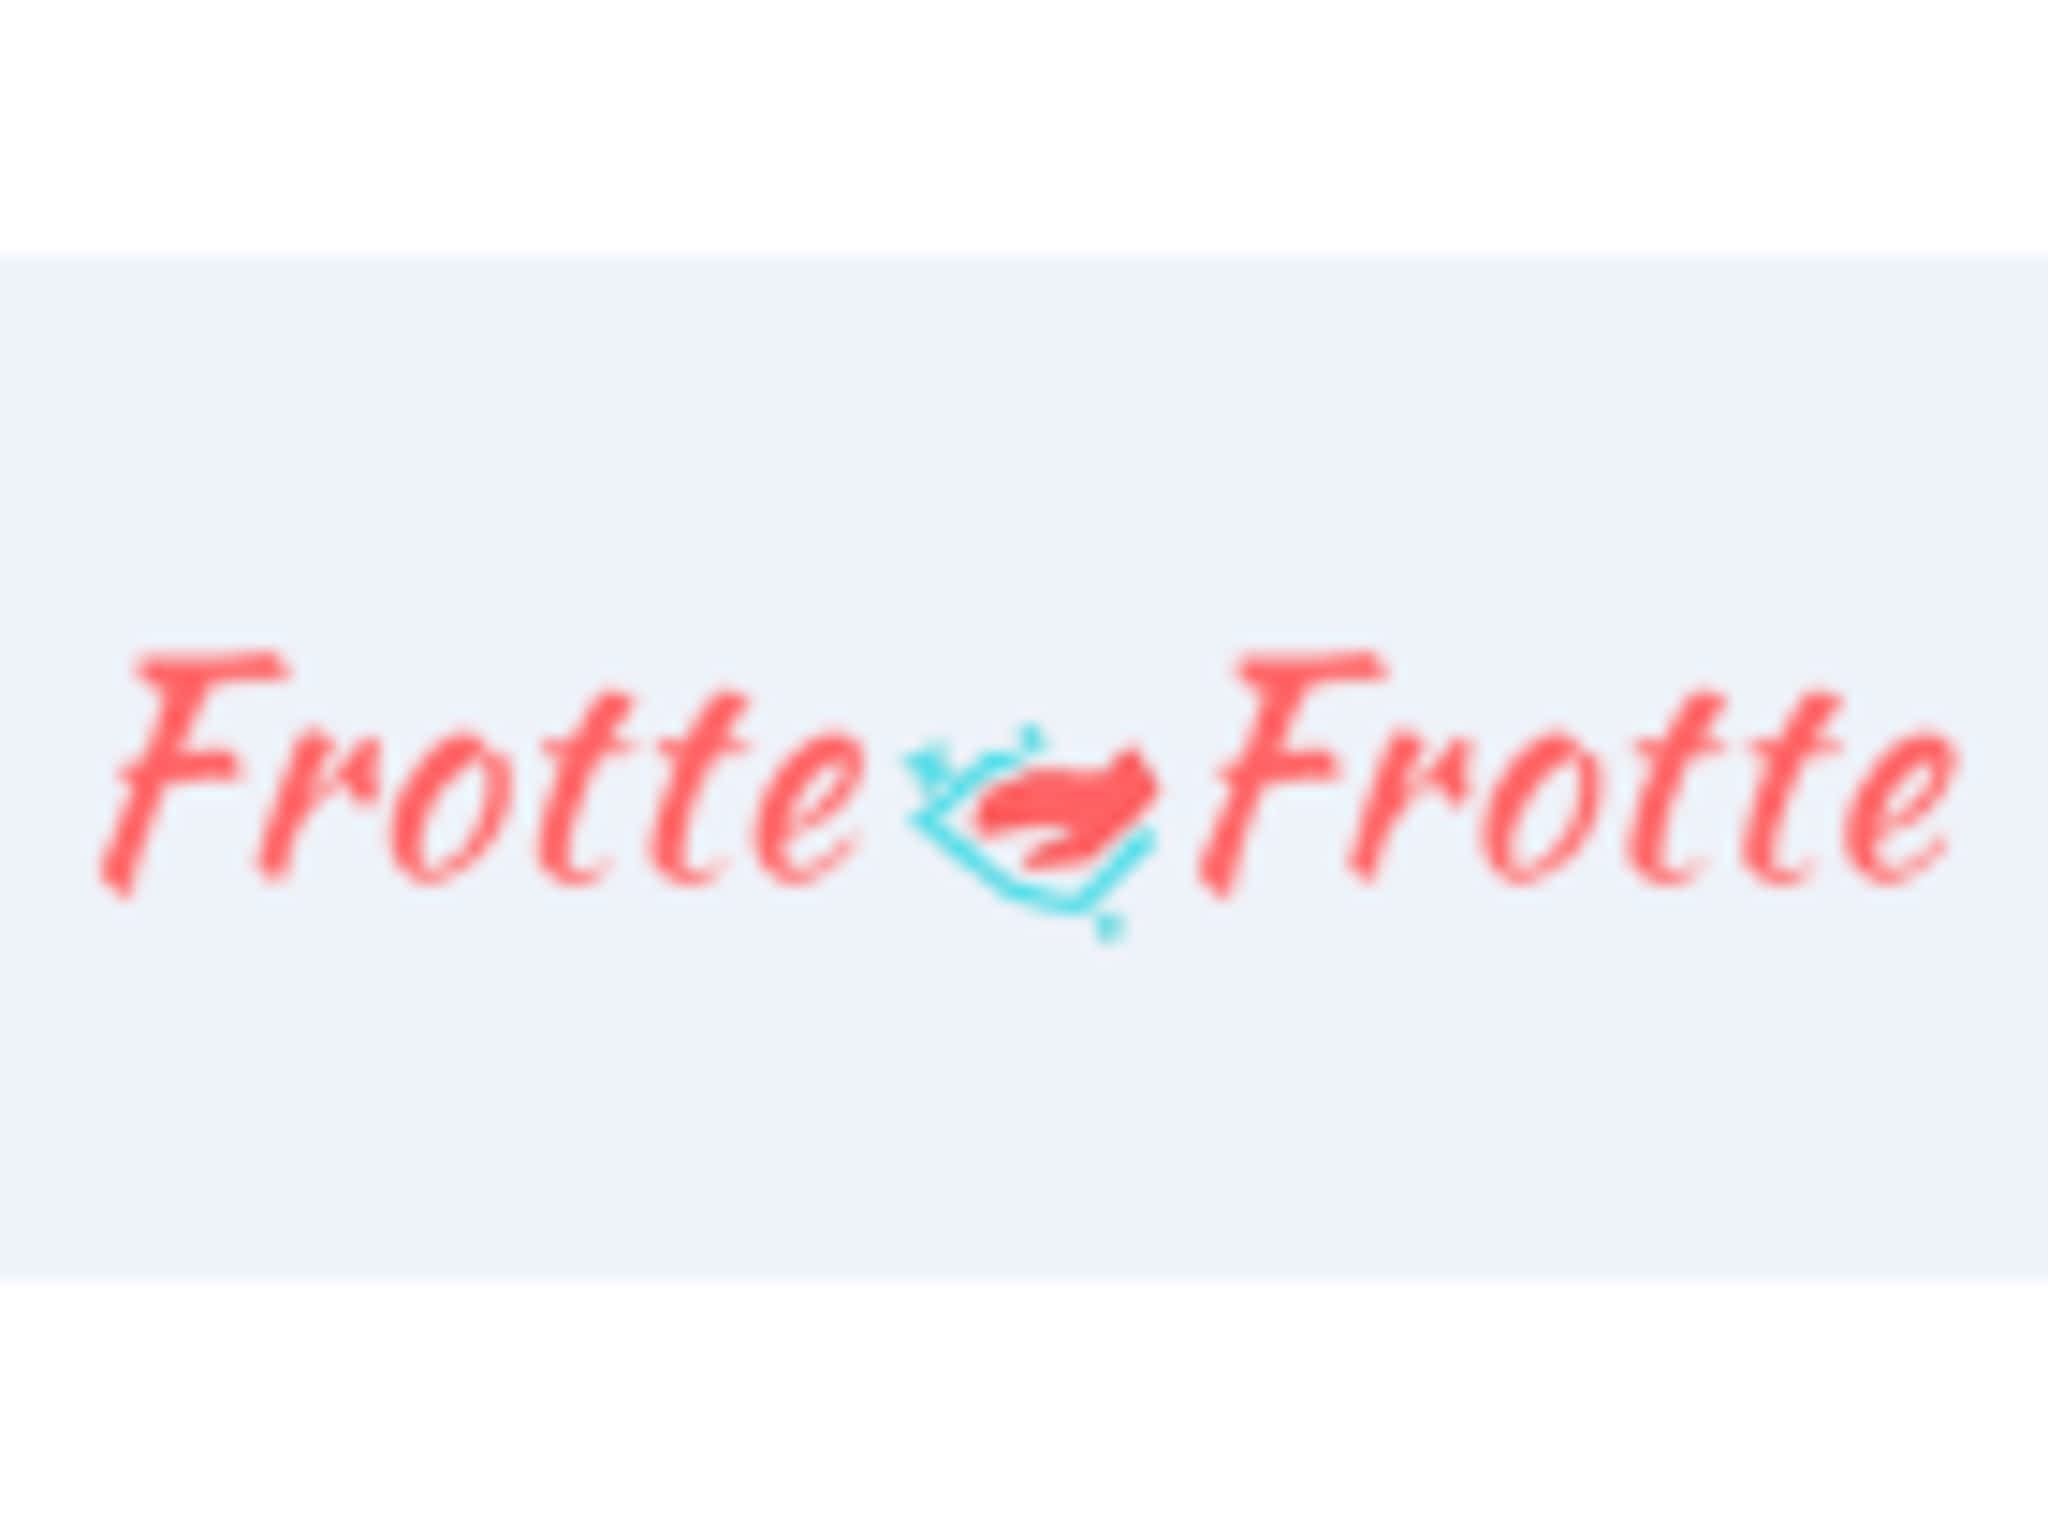 photo Frotte-Frotte